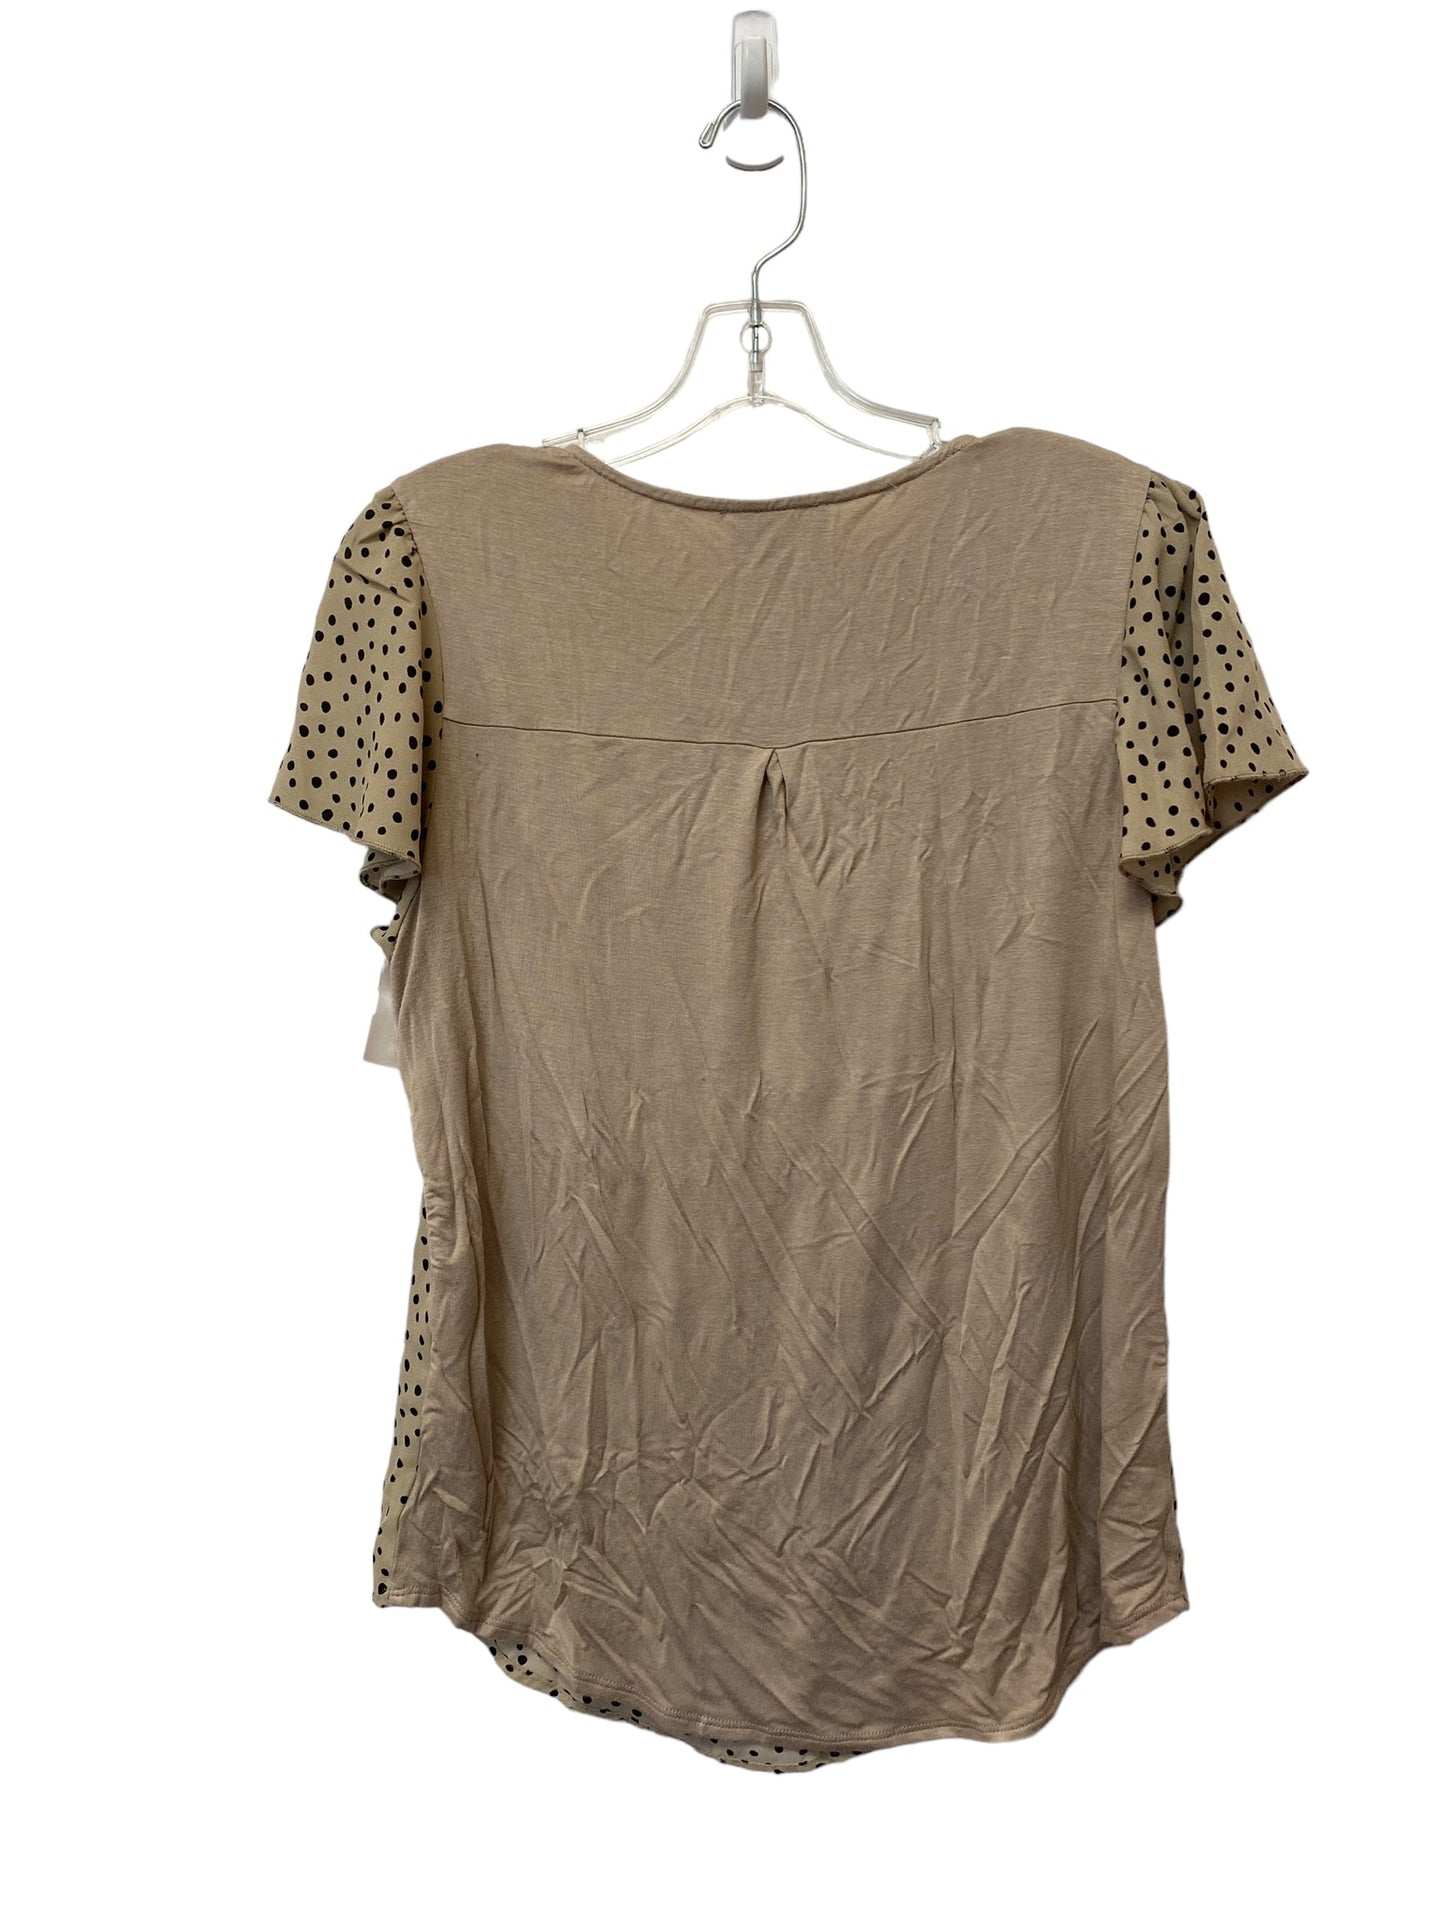 Tan Top Short Sleeve Fortune & Ivy, Size S